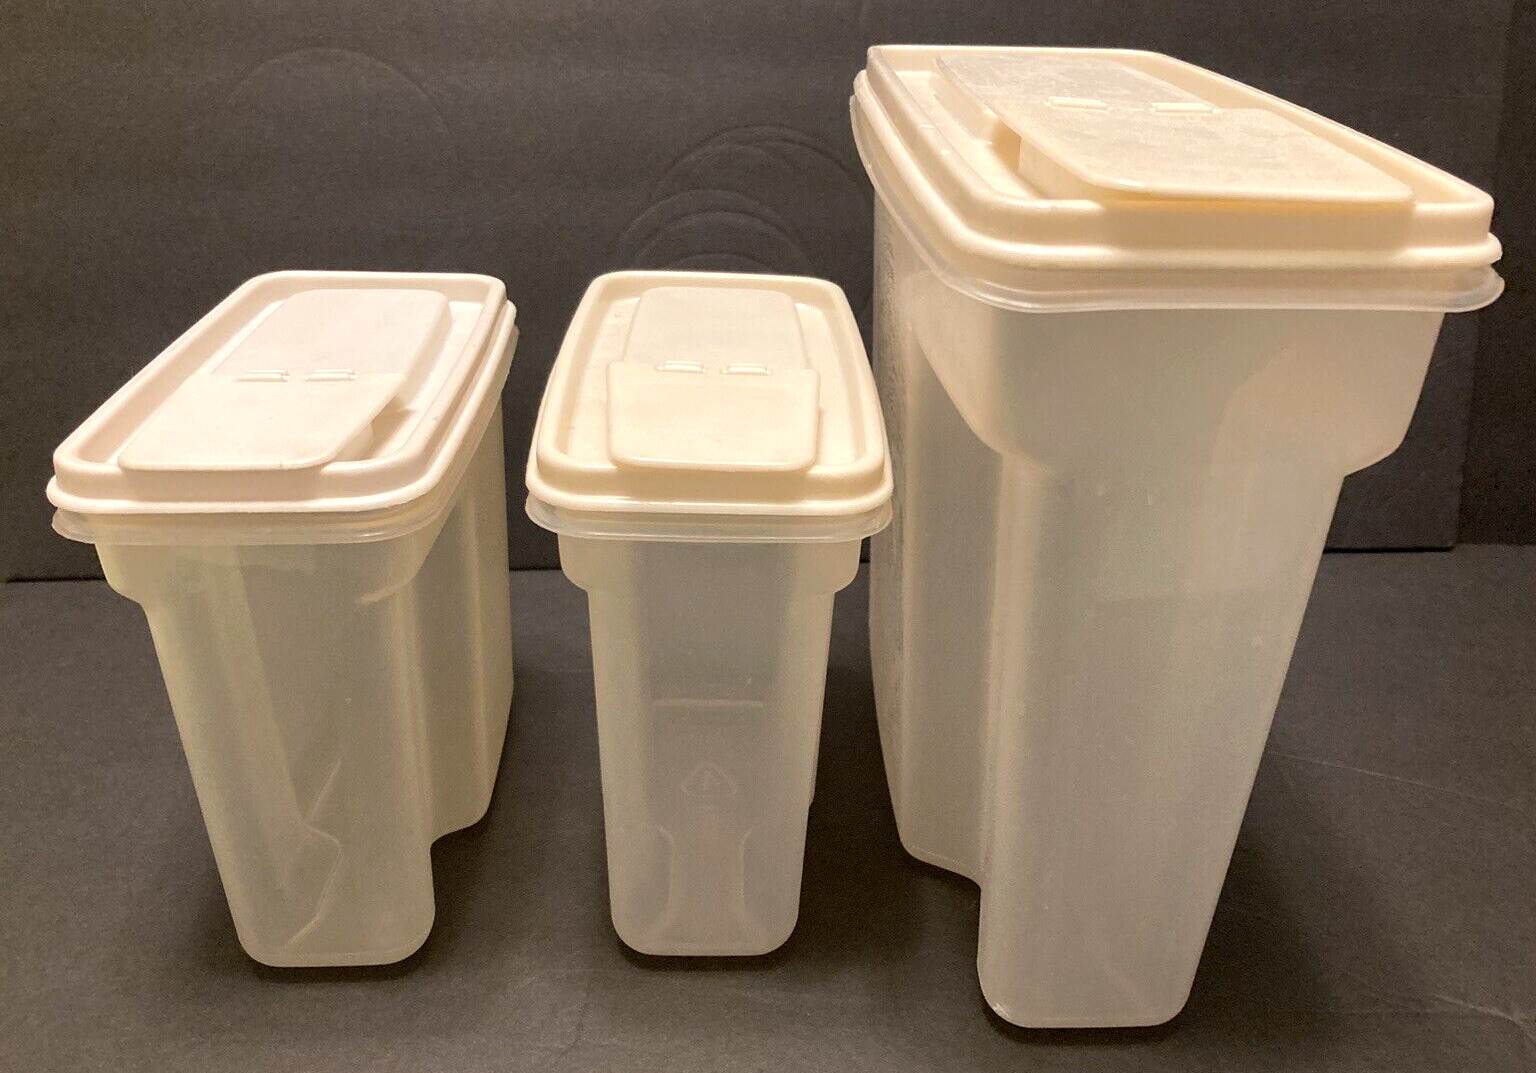 Rubbermaid 13 Cup & Two 4 Cup Servin Saver Cereal Storage Container #3&4 - VTG.